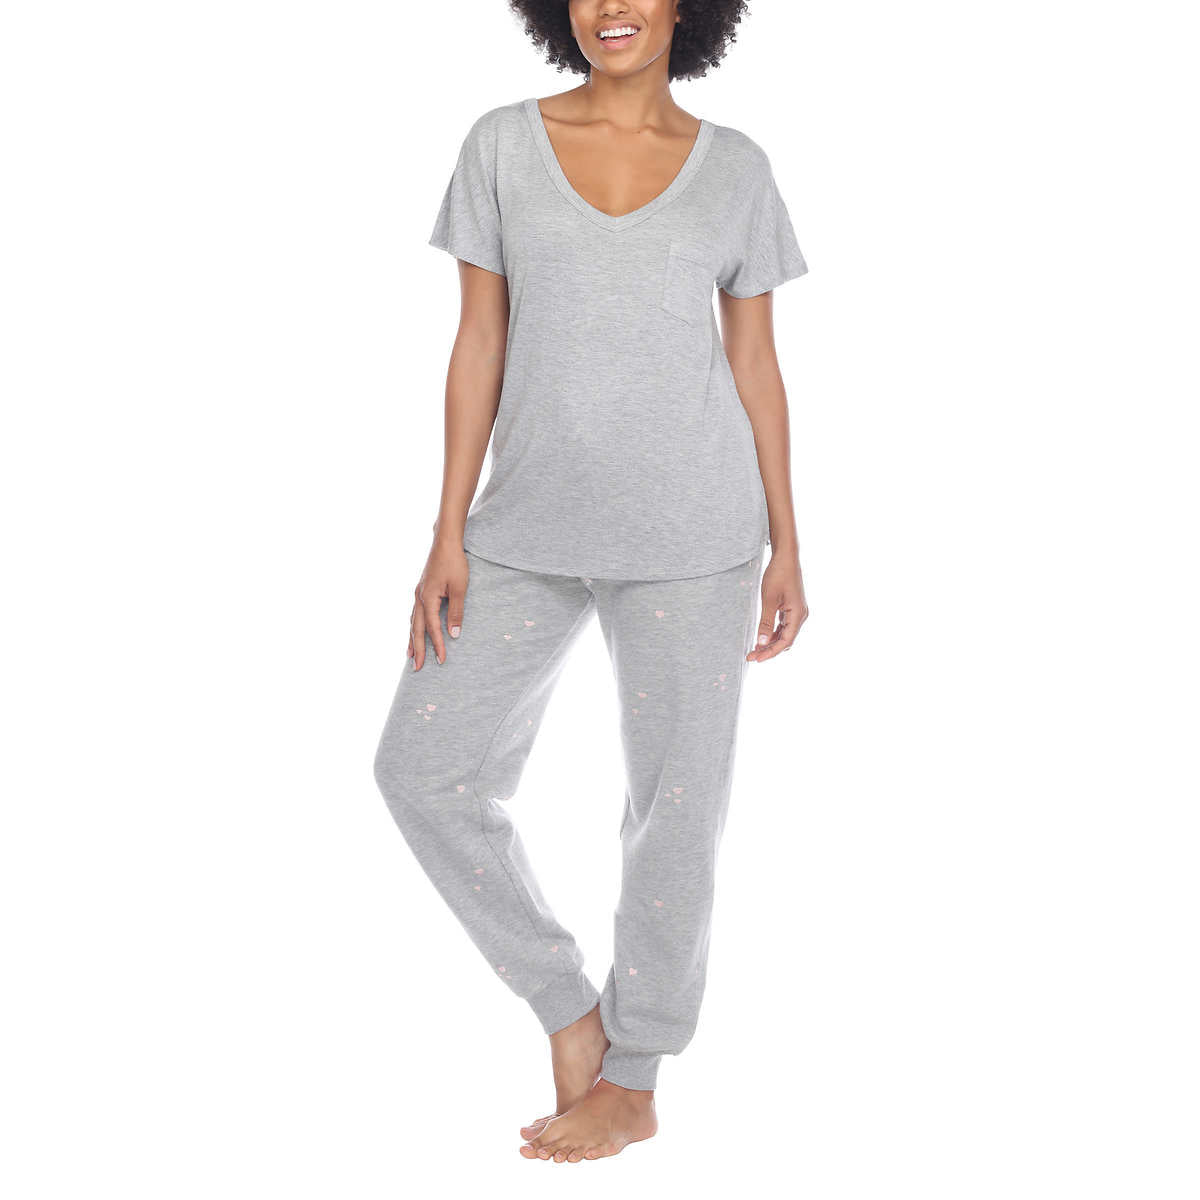 Honeydew Women's 2-piece Pajama Cotton Blend Embroidered Top and Pants Lounge Set